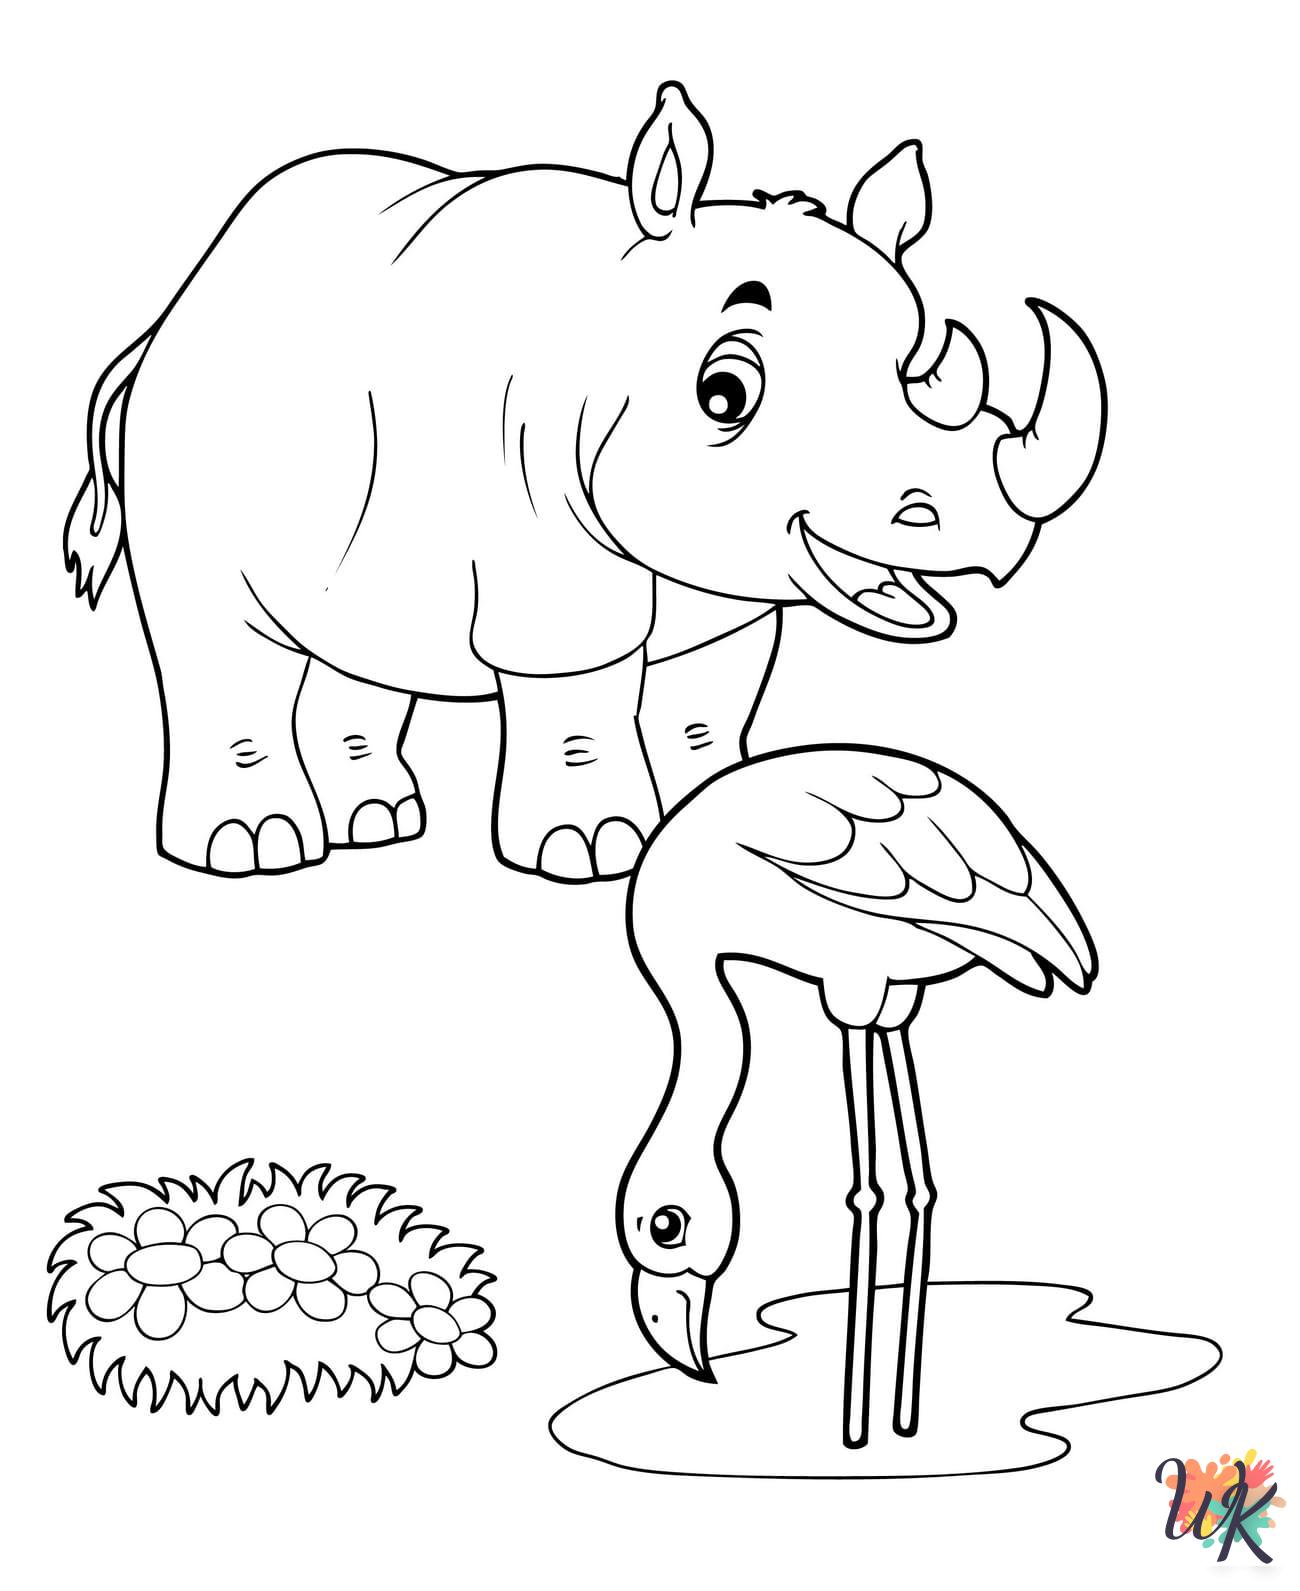 merry Flamingo coloring pages